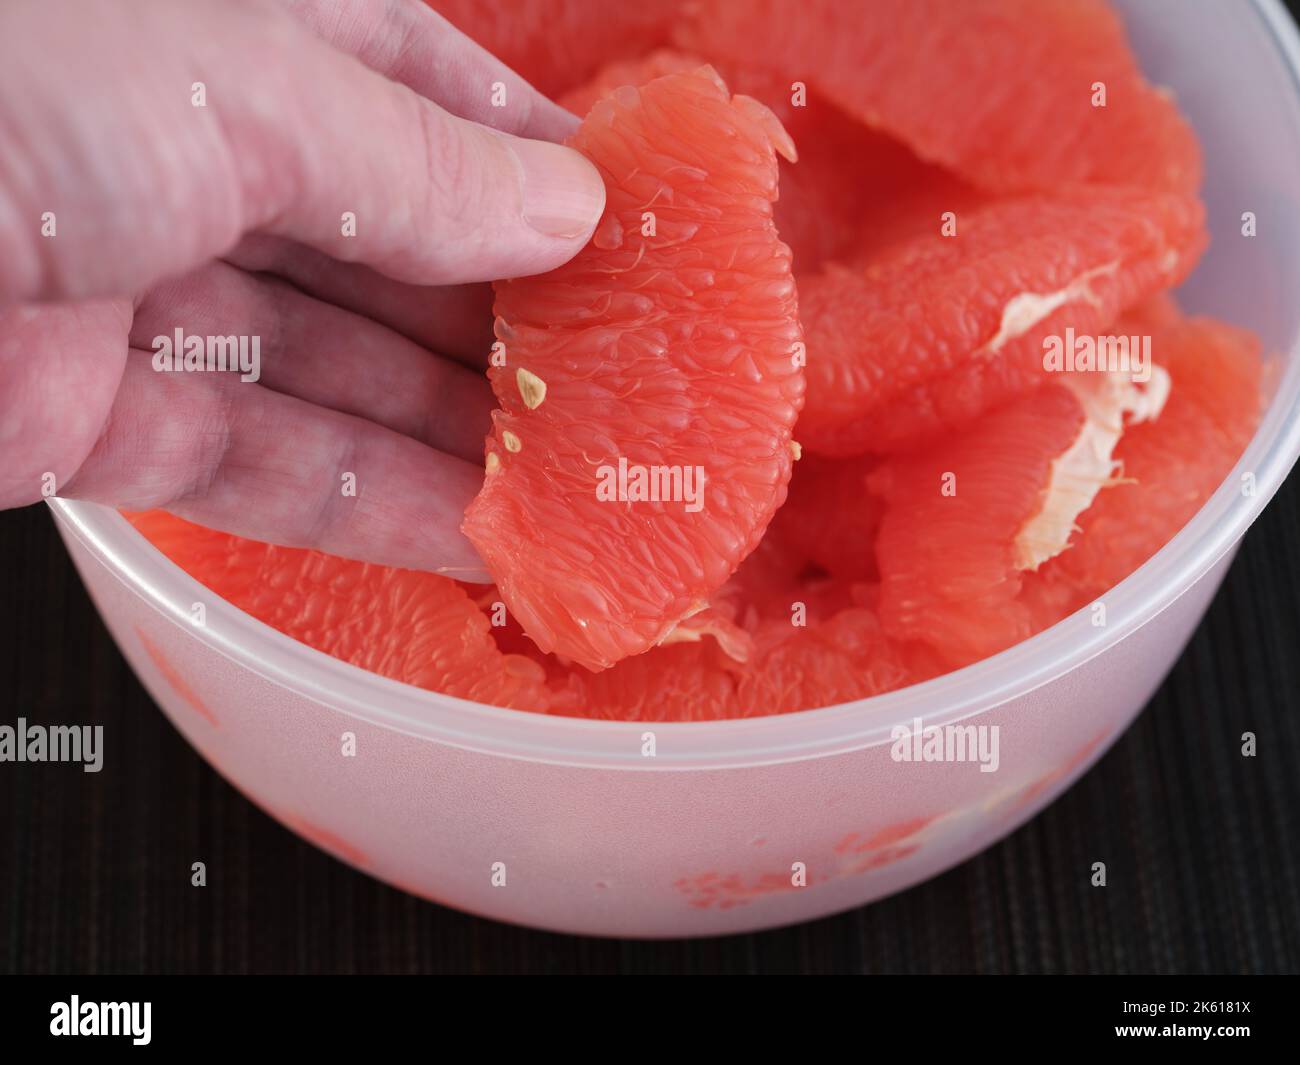 A man taking a grapefruit slice out of a bowl of grapefruit slices. Close up. Stock Photo